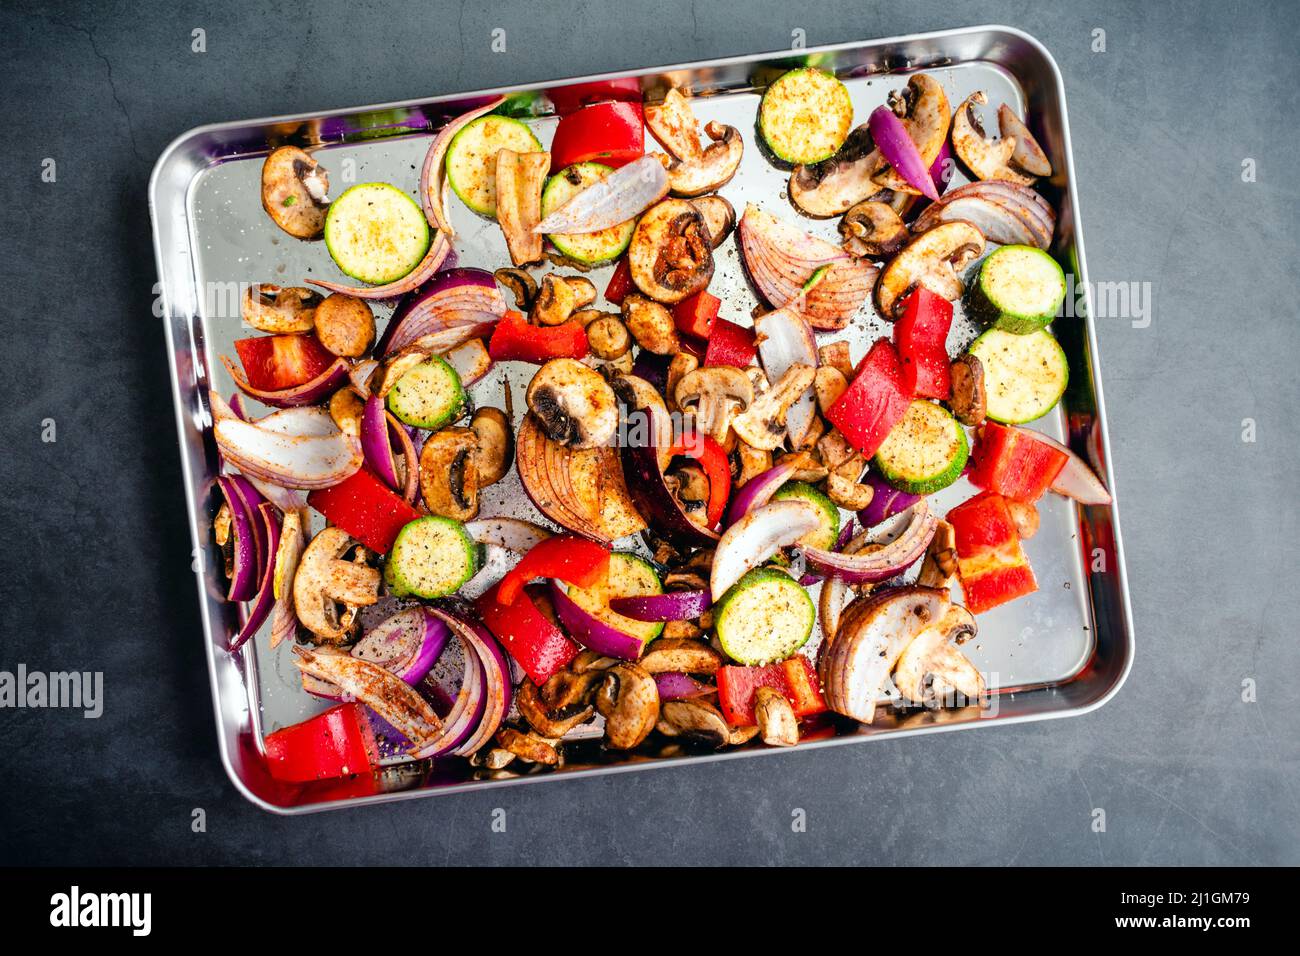 Overhead View of Raw Vegetables Seasoned with Olive Oil and Spices: Sliced and seasoned vegetables on a sheet pan Stock Photo